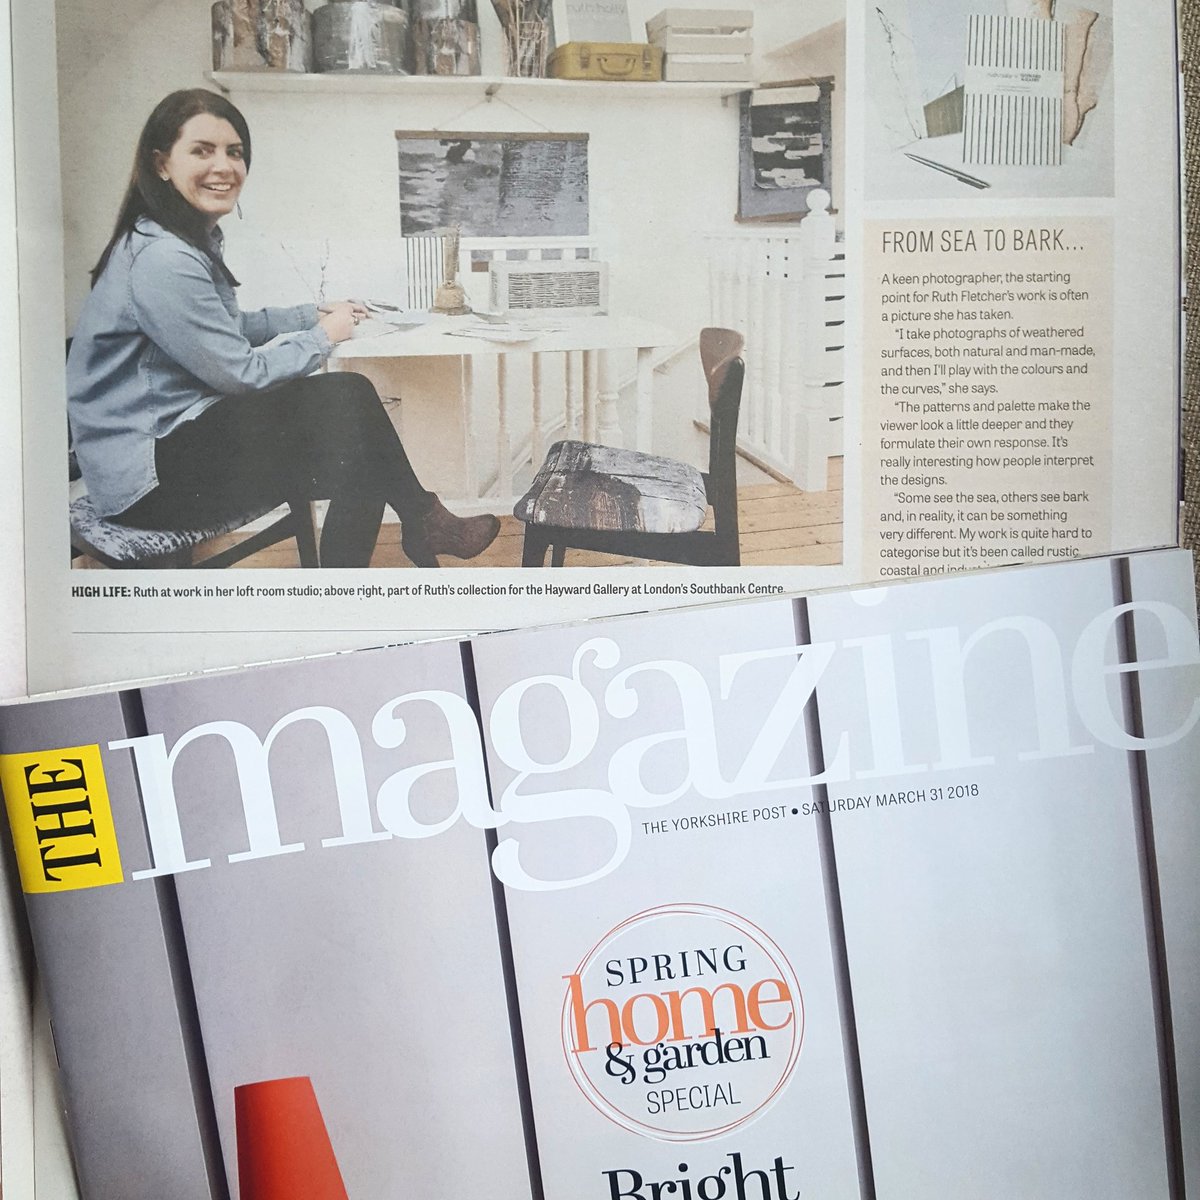 Thanks to @propertywords for today's real homes feature in @yorkshirepost 
#cosyliving #newhomedecor #sympatheticdesign #observeandreport #designloves #southbankcentre
#haywardgallery
#collaboration #tactilelivingspace #inspiredby  #textureinthehome #artist #beauty #passion